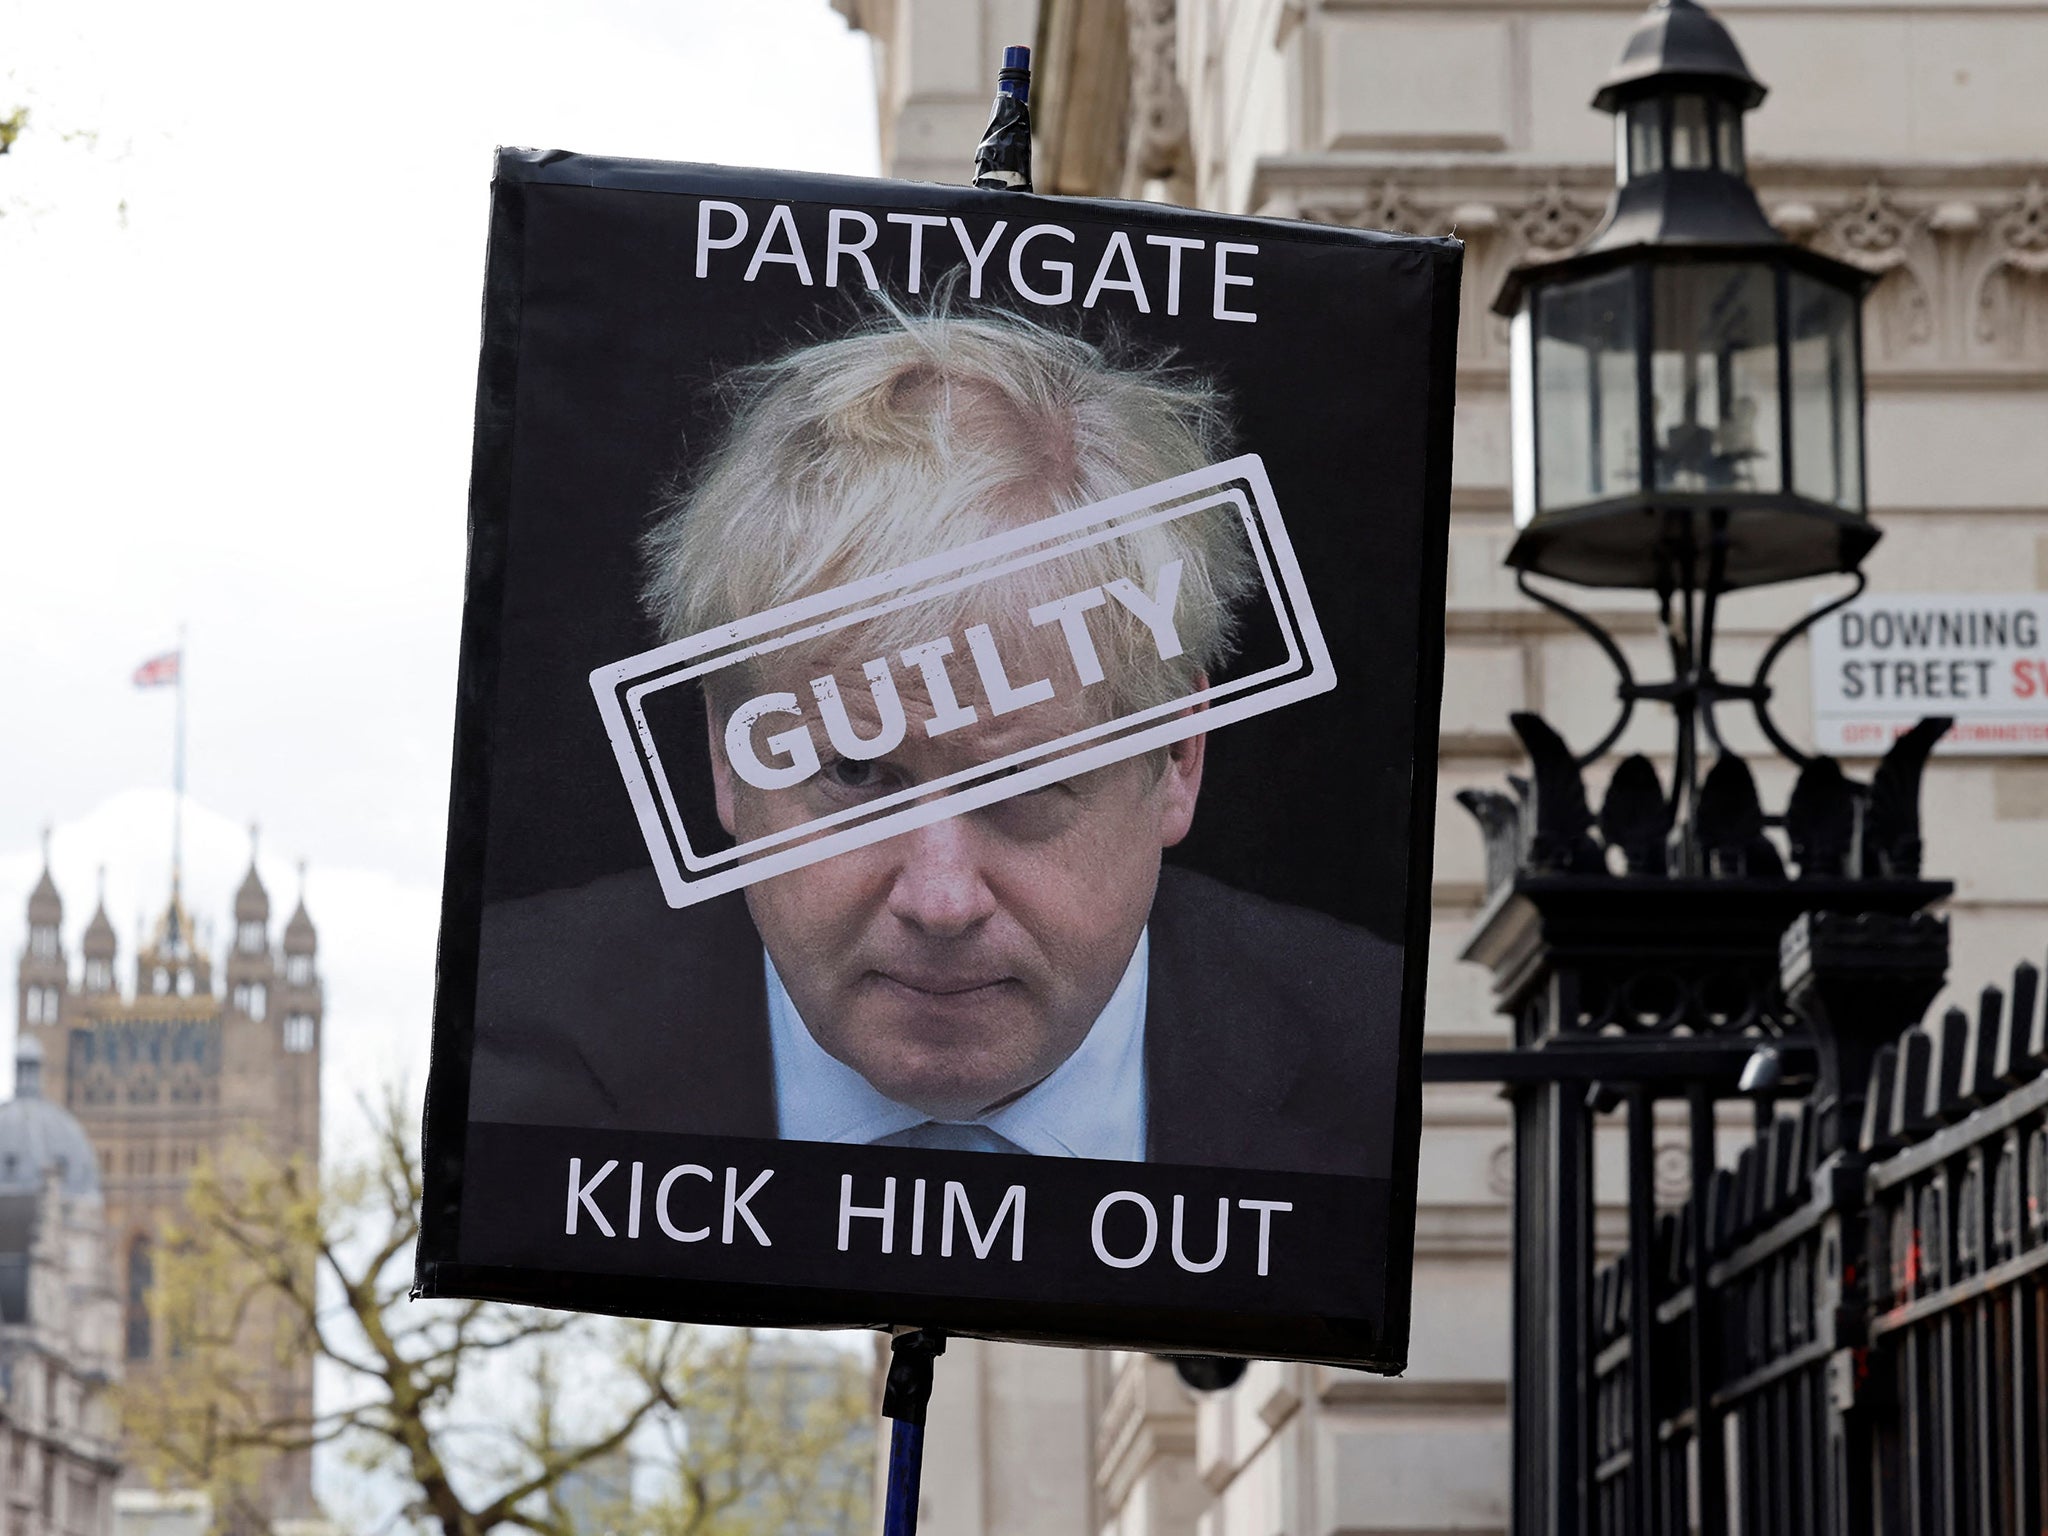 A placard calling for Boris Johnson to resign after the Partygate revelations